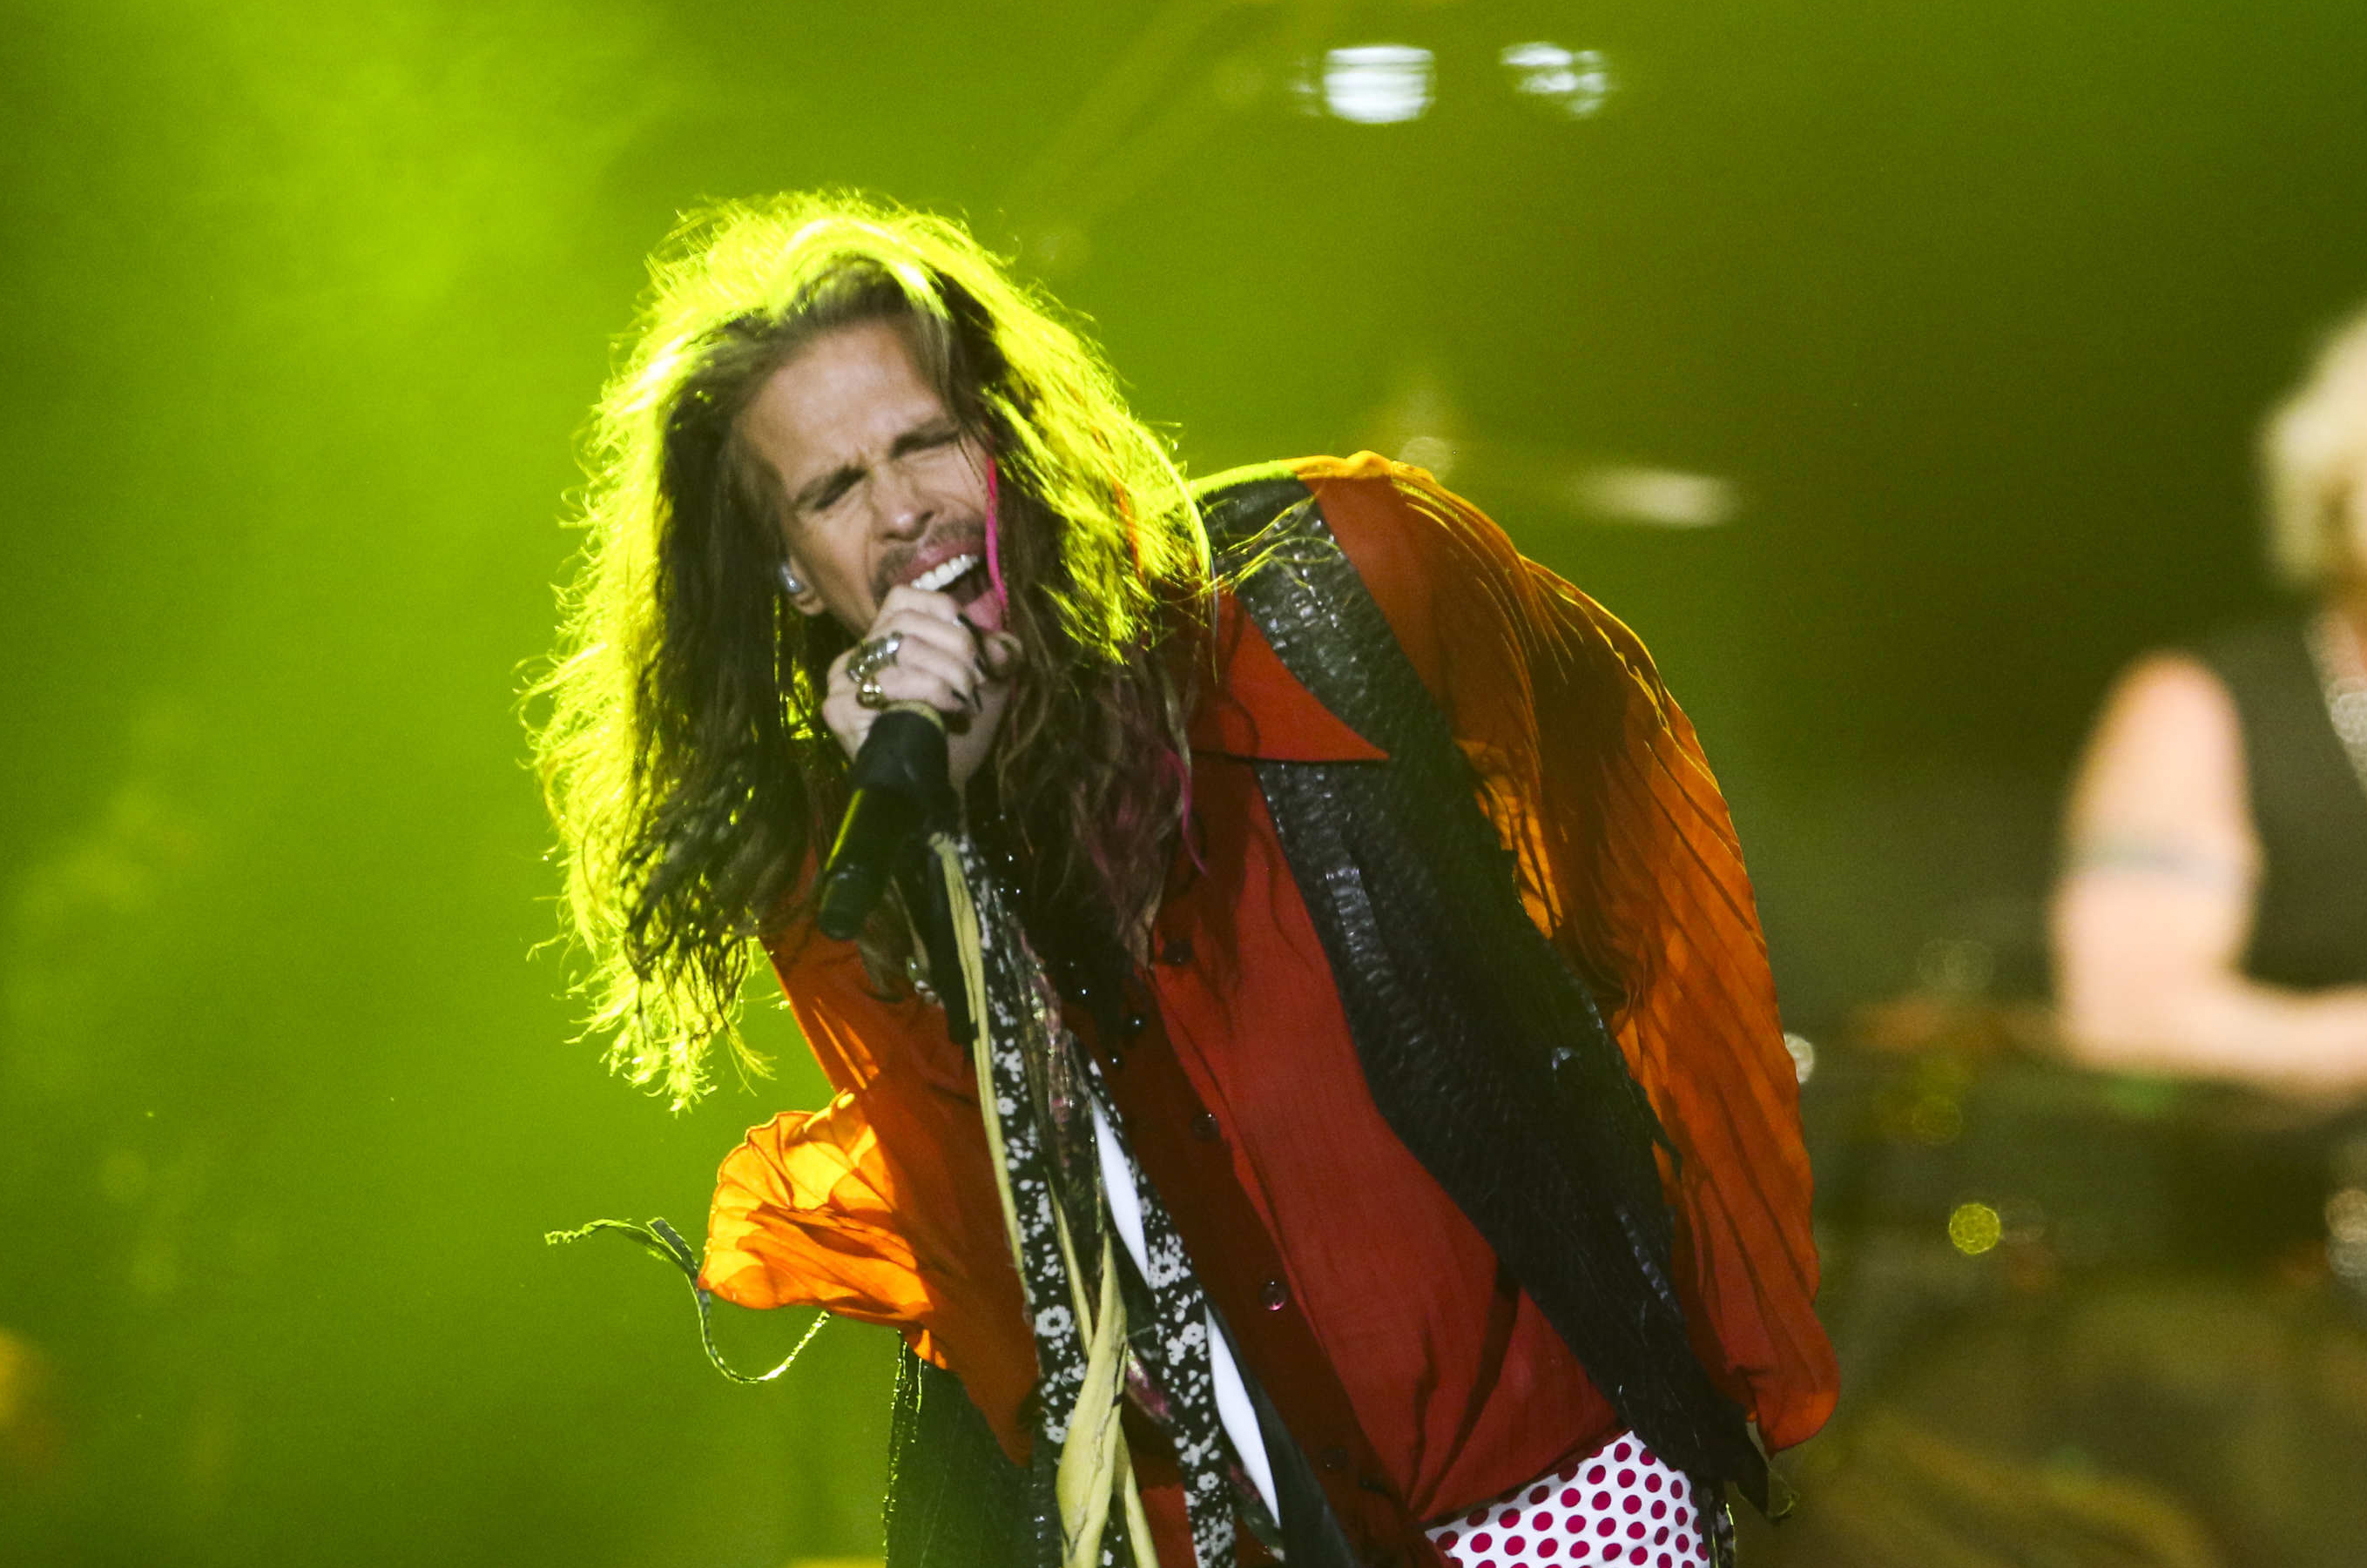 Aerosmith lead singer Steven Tyler sings 'God Bless America' during the  seventh inning stretch of the Red Sox home opener against the Detroit  Tigers at Fenway Park in Boston, Massachusetts on April